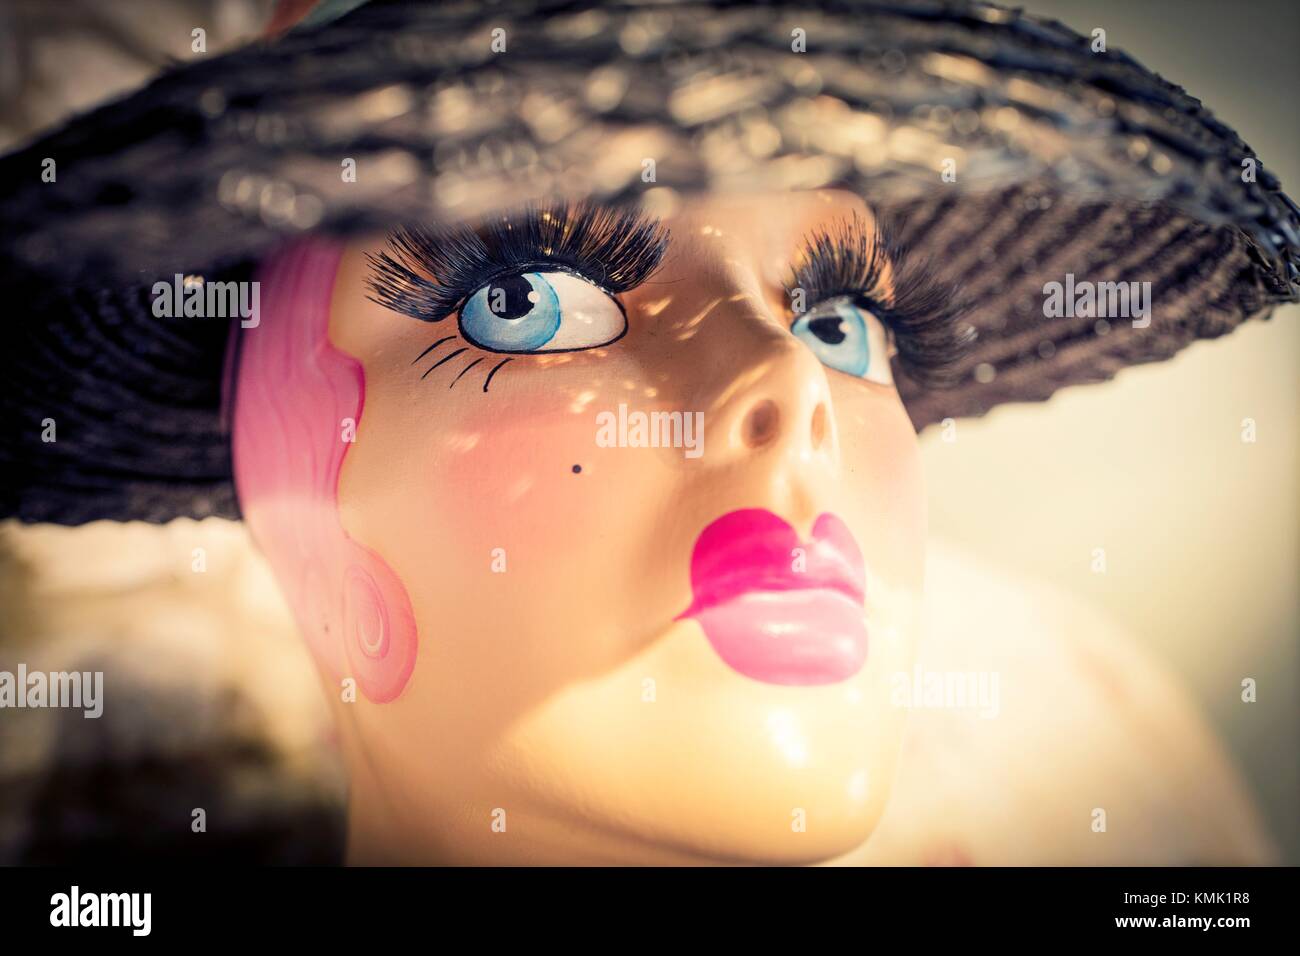 Close-up of the face of a mannequin. Grassington, Skopton, North Yorkshire, England, UK Stock Photo